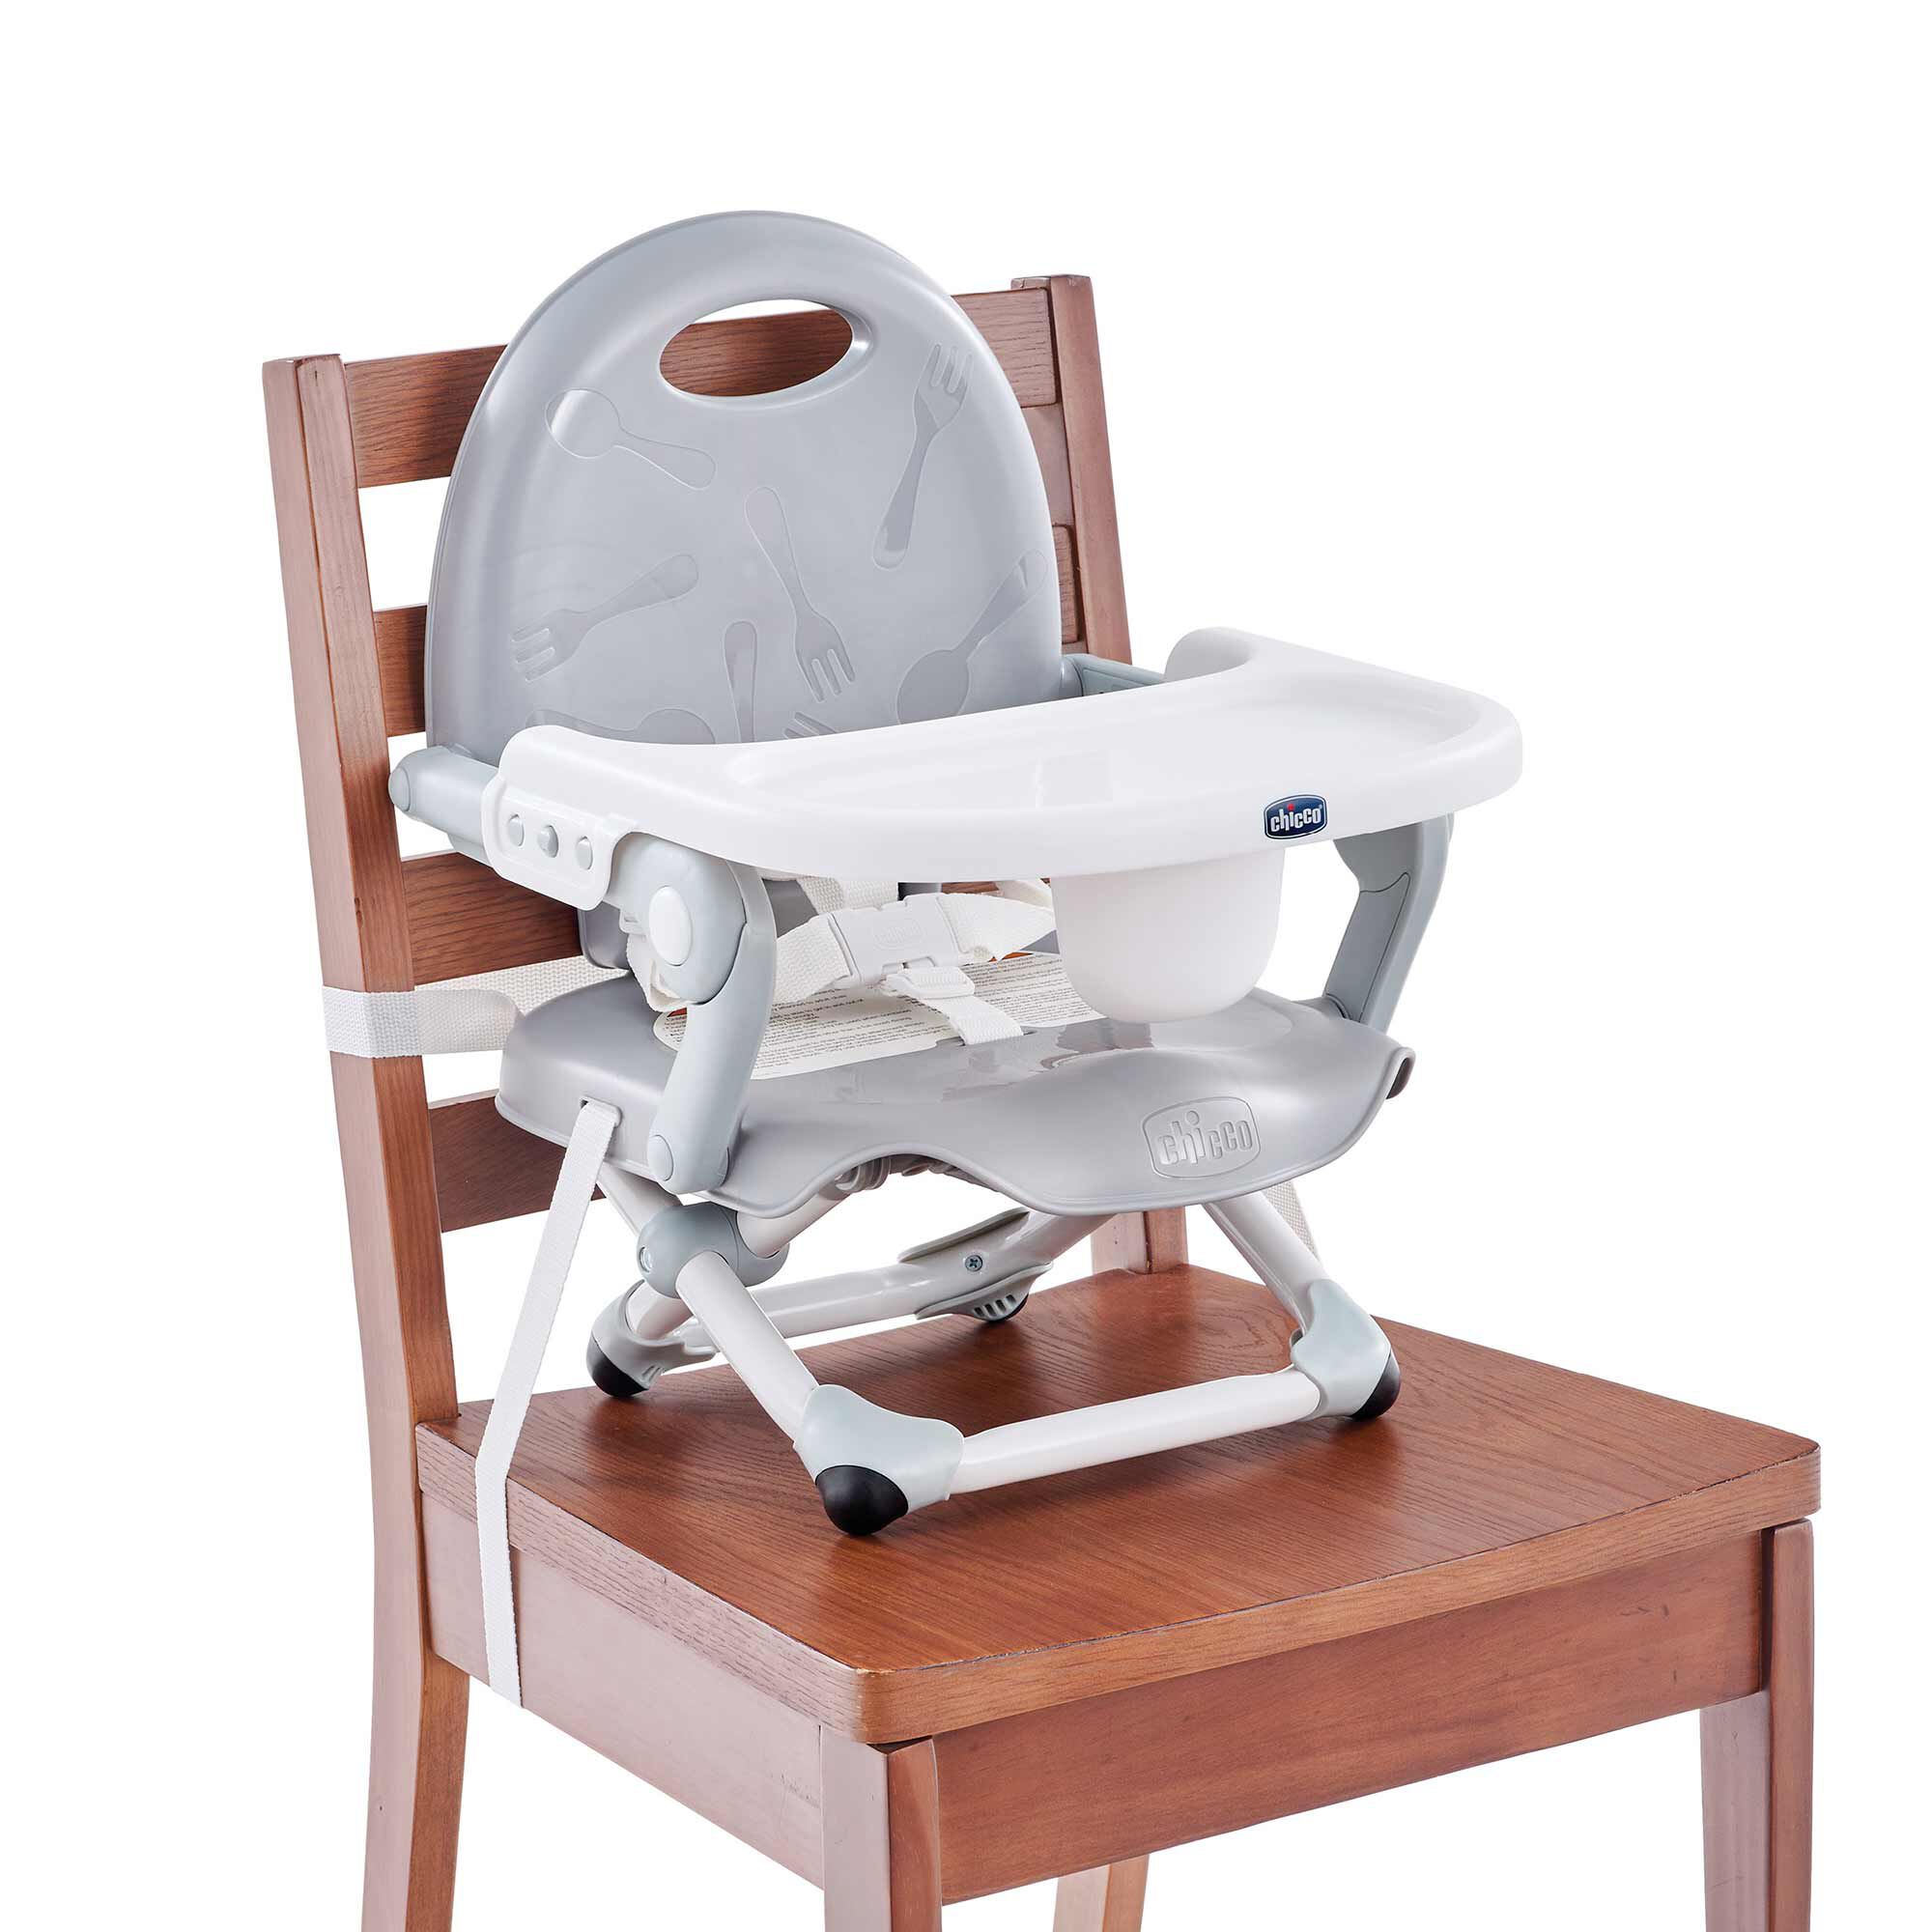 https://www.chiccousa.com/dw/image/v2/AAMT_PRD/on/demandware.static/-/Sites-chicco_catalog/default/dwb3188439/images/products/Gear/pocket-snack/chicco-pocket-snack-booster-seat-grey-3Q-Front.jpg?sw=2000&sh=2000&sm=fit